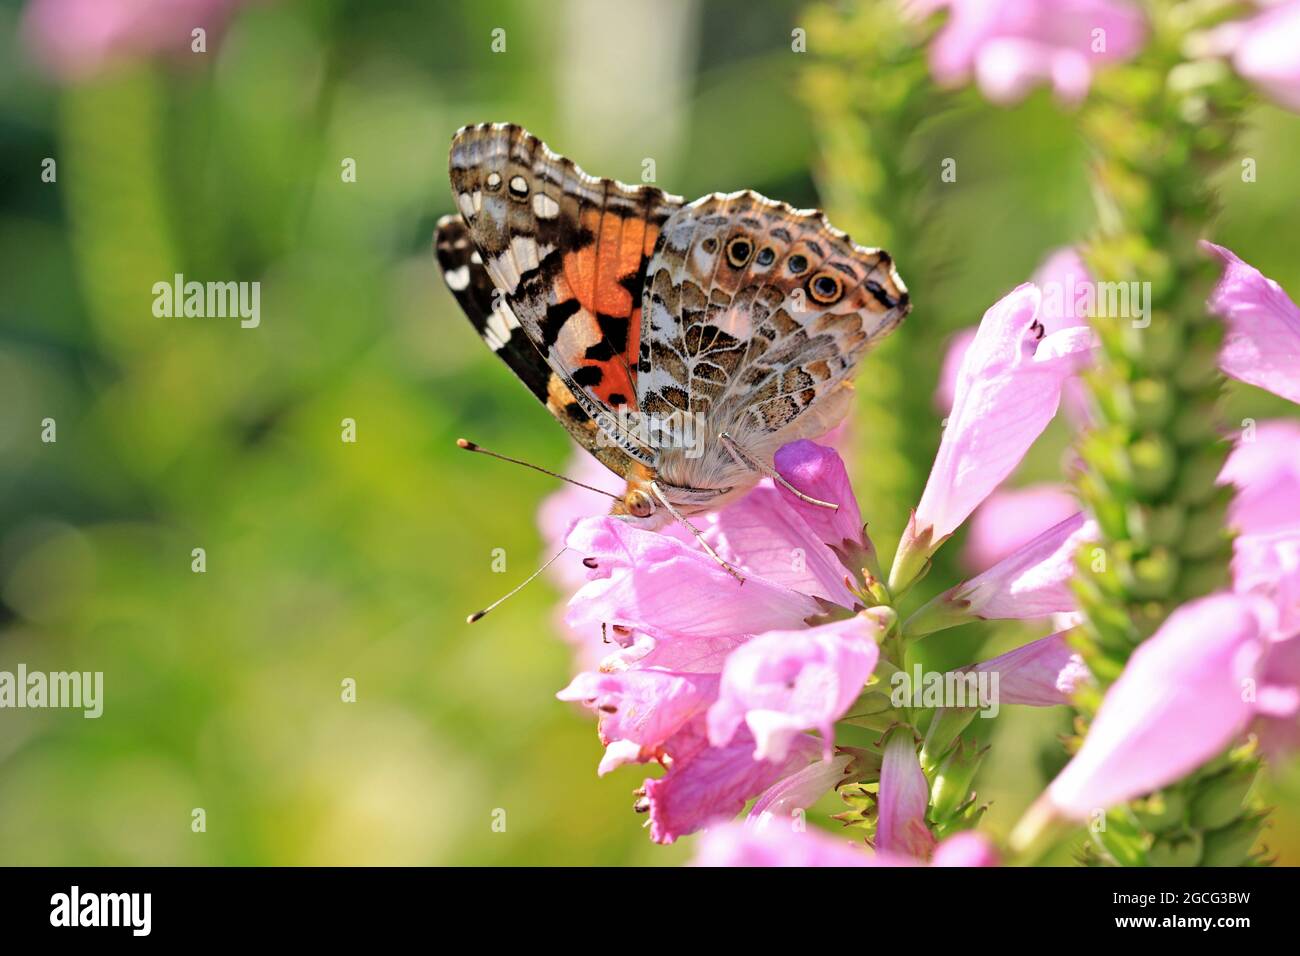 Close-up of a Painted lady butterfly (Vanessa cardui) pollinating a False Dragonhead flower (Physostegia virginiana) Stock Photo